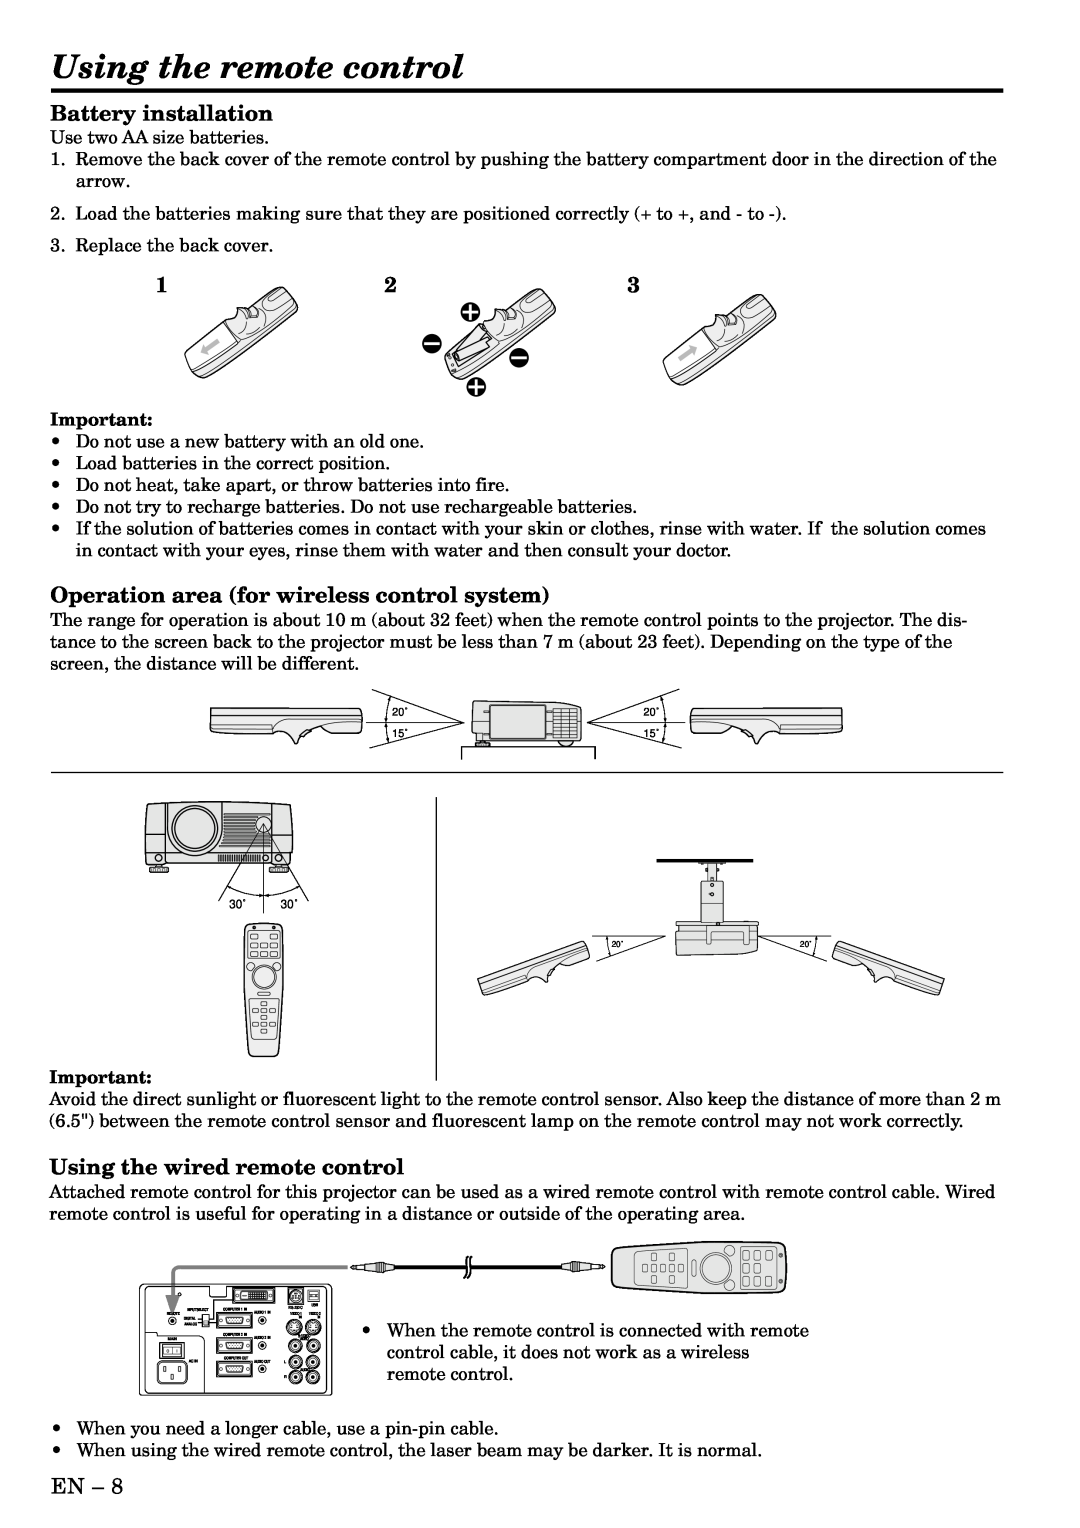 Mitsubishi Electronics LVP-X400U user manual Using the remote control, Battery installation, Using the wired remote control 